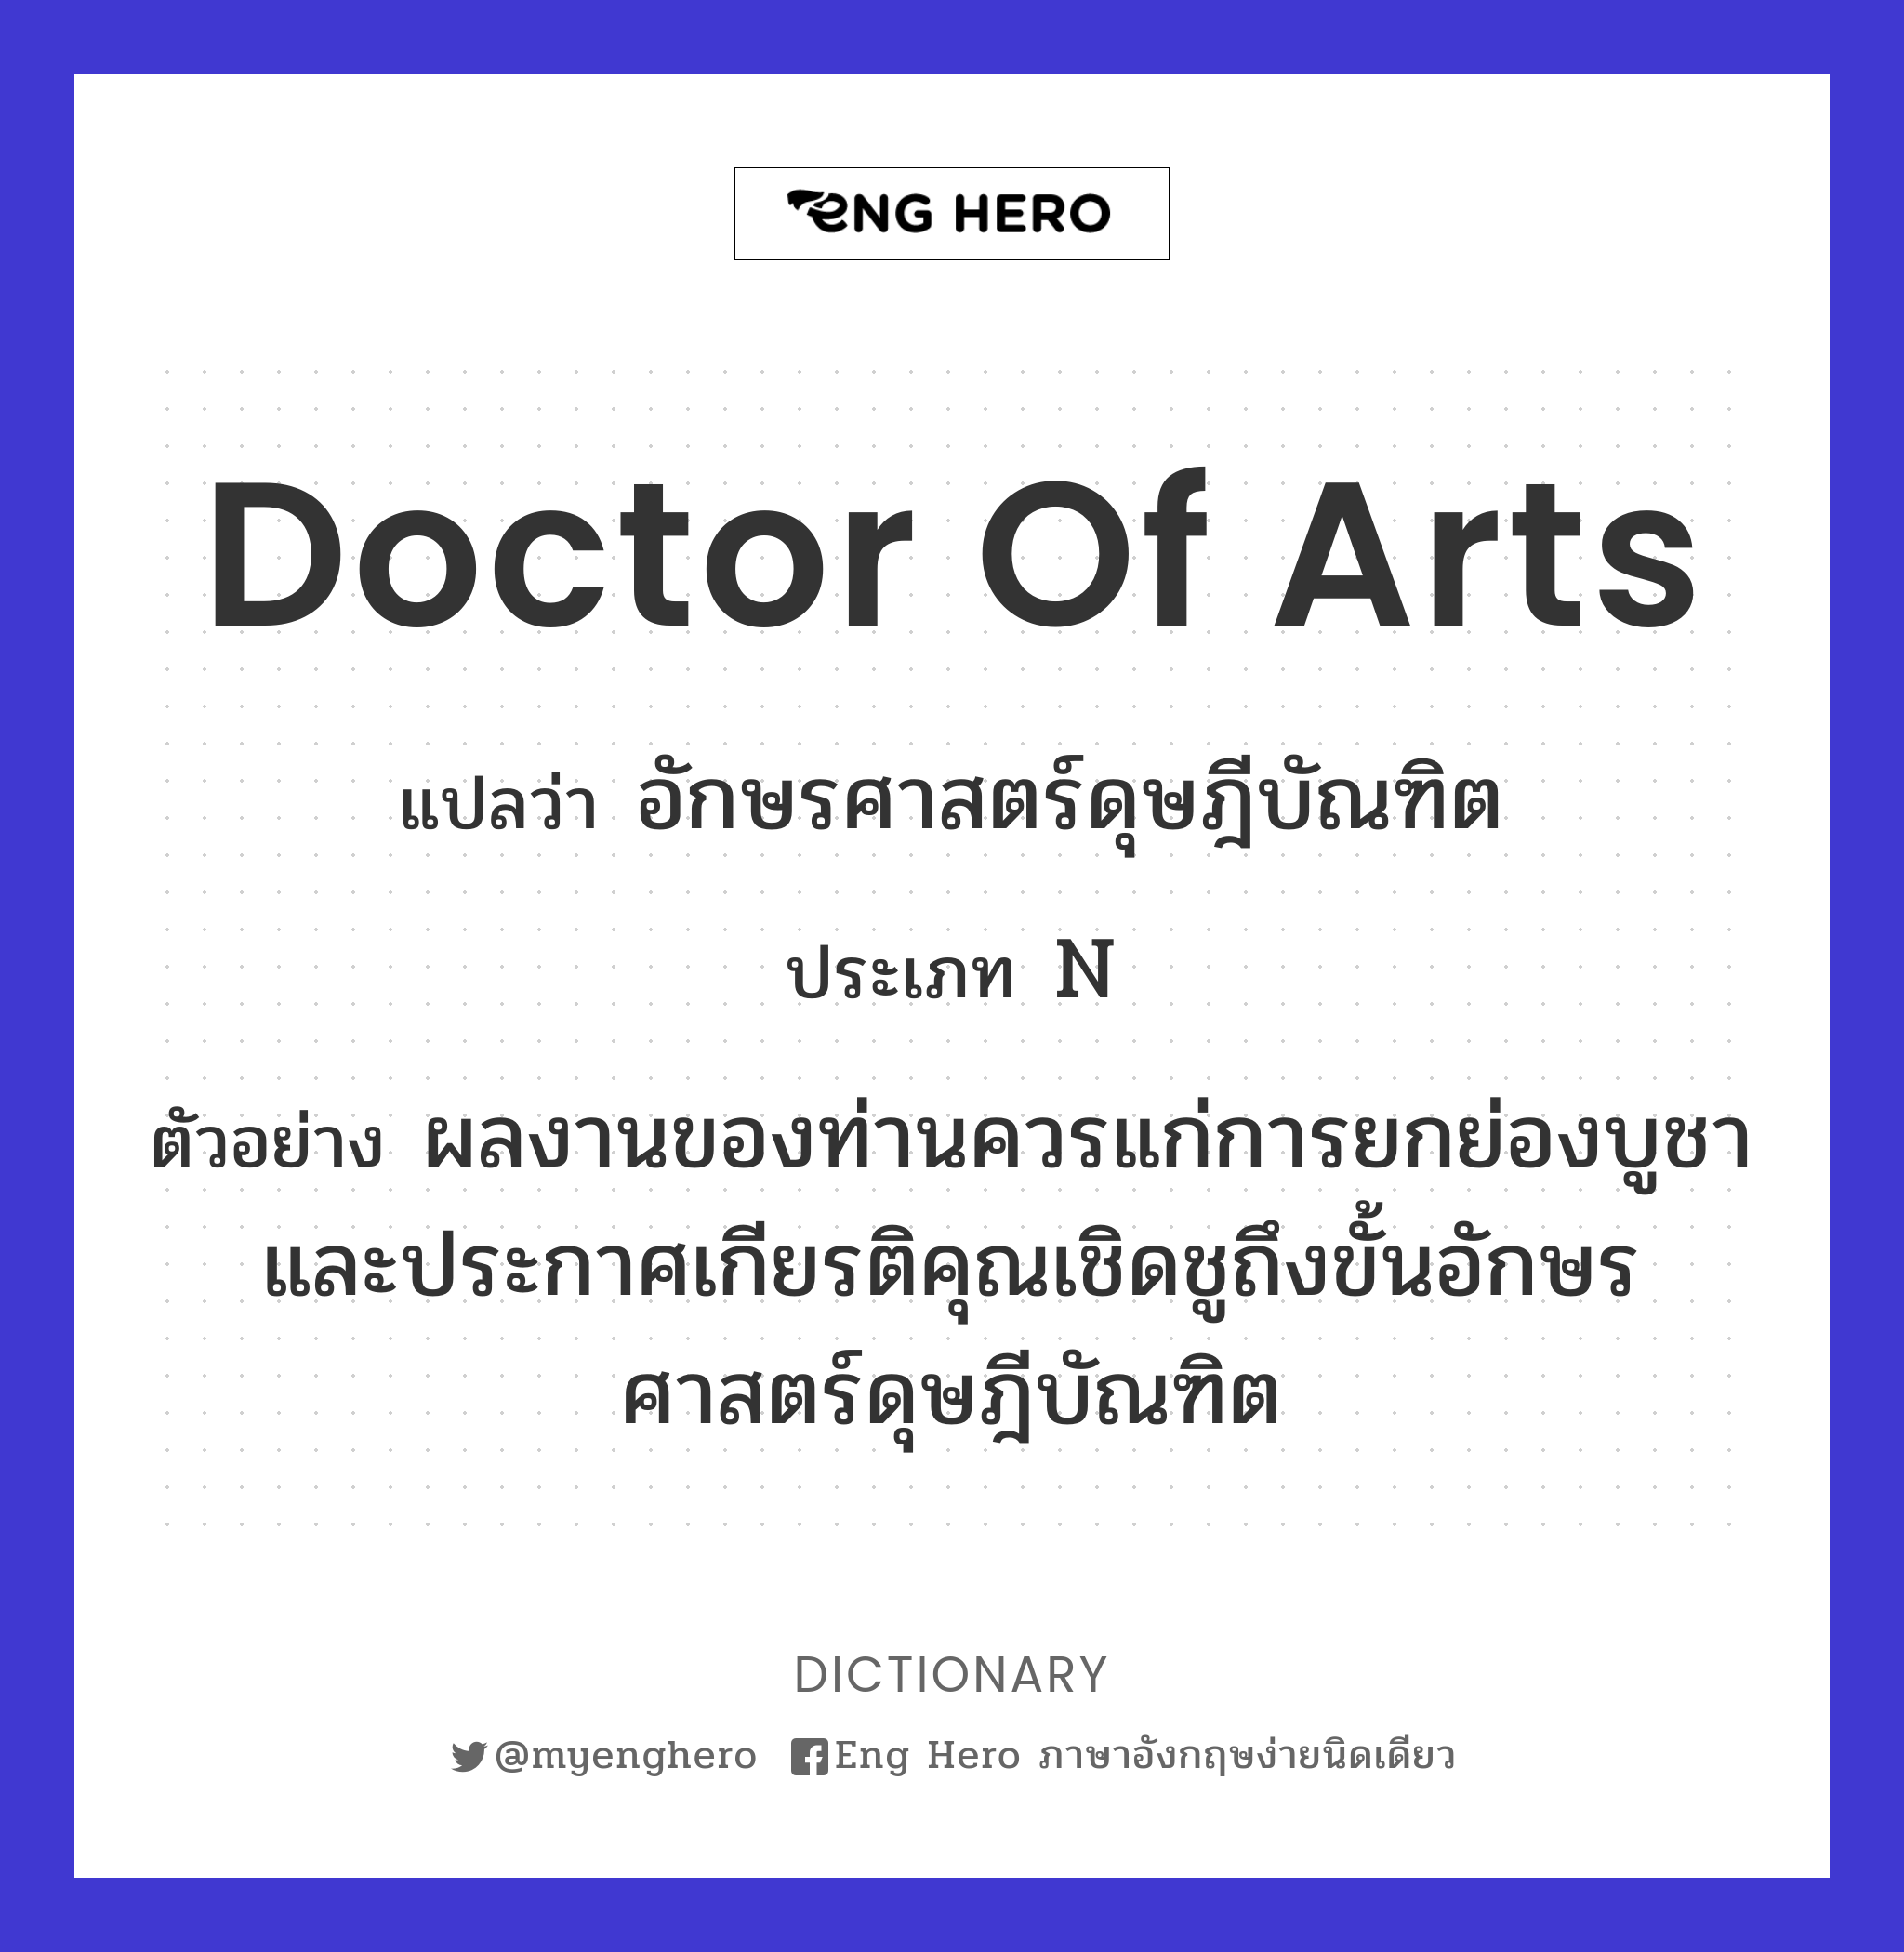 Doctor of Arts